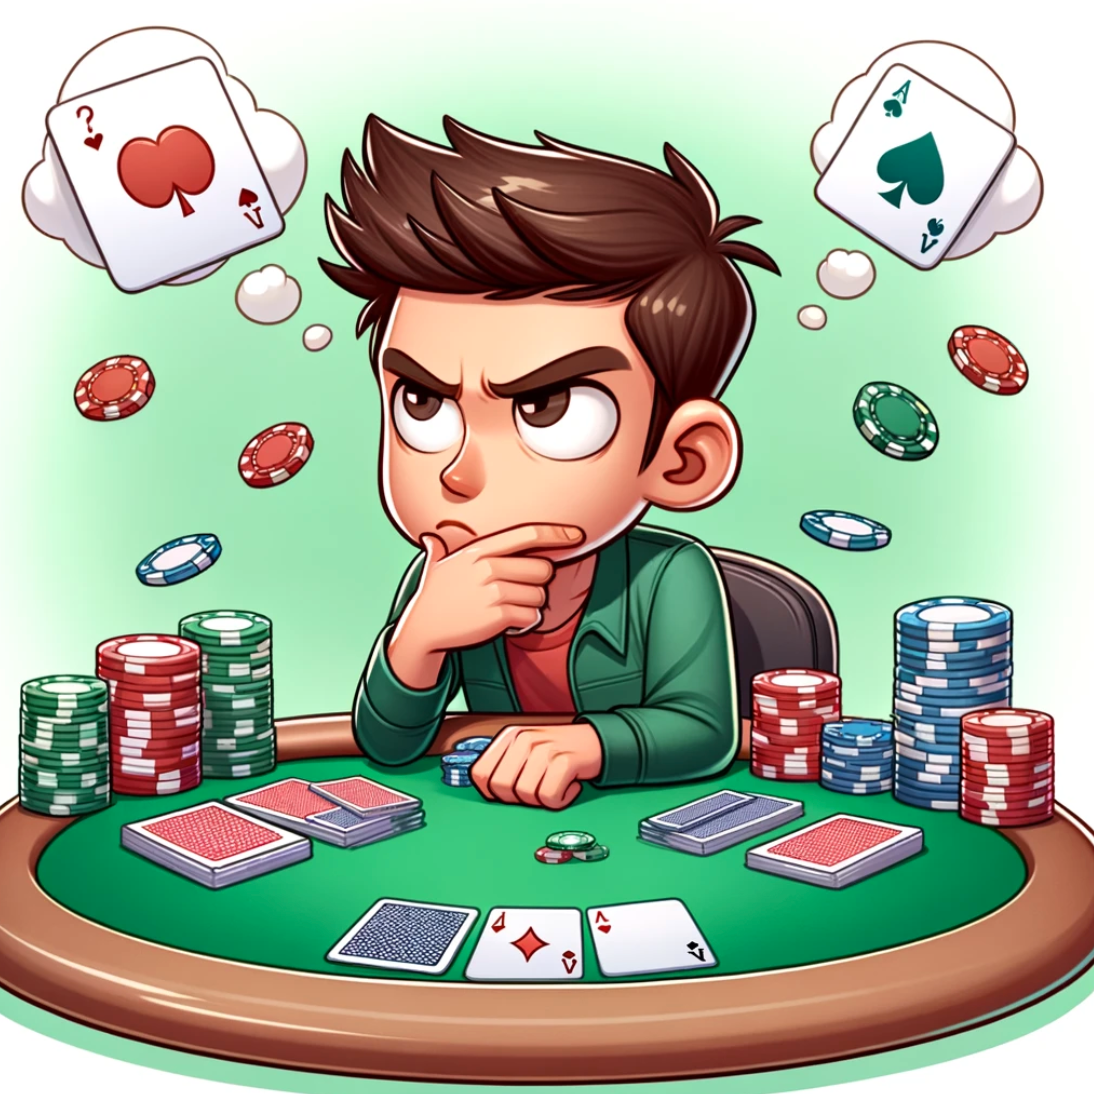 Here is a cartoon image of a poker player deep in thought at a poker table, encapsulating the essence of strategic thinking in poker.